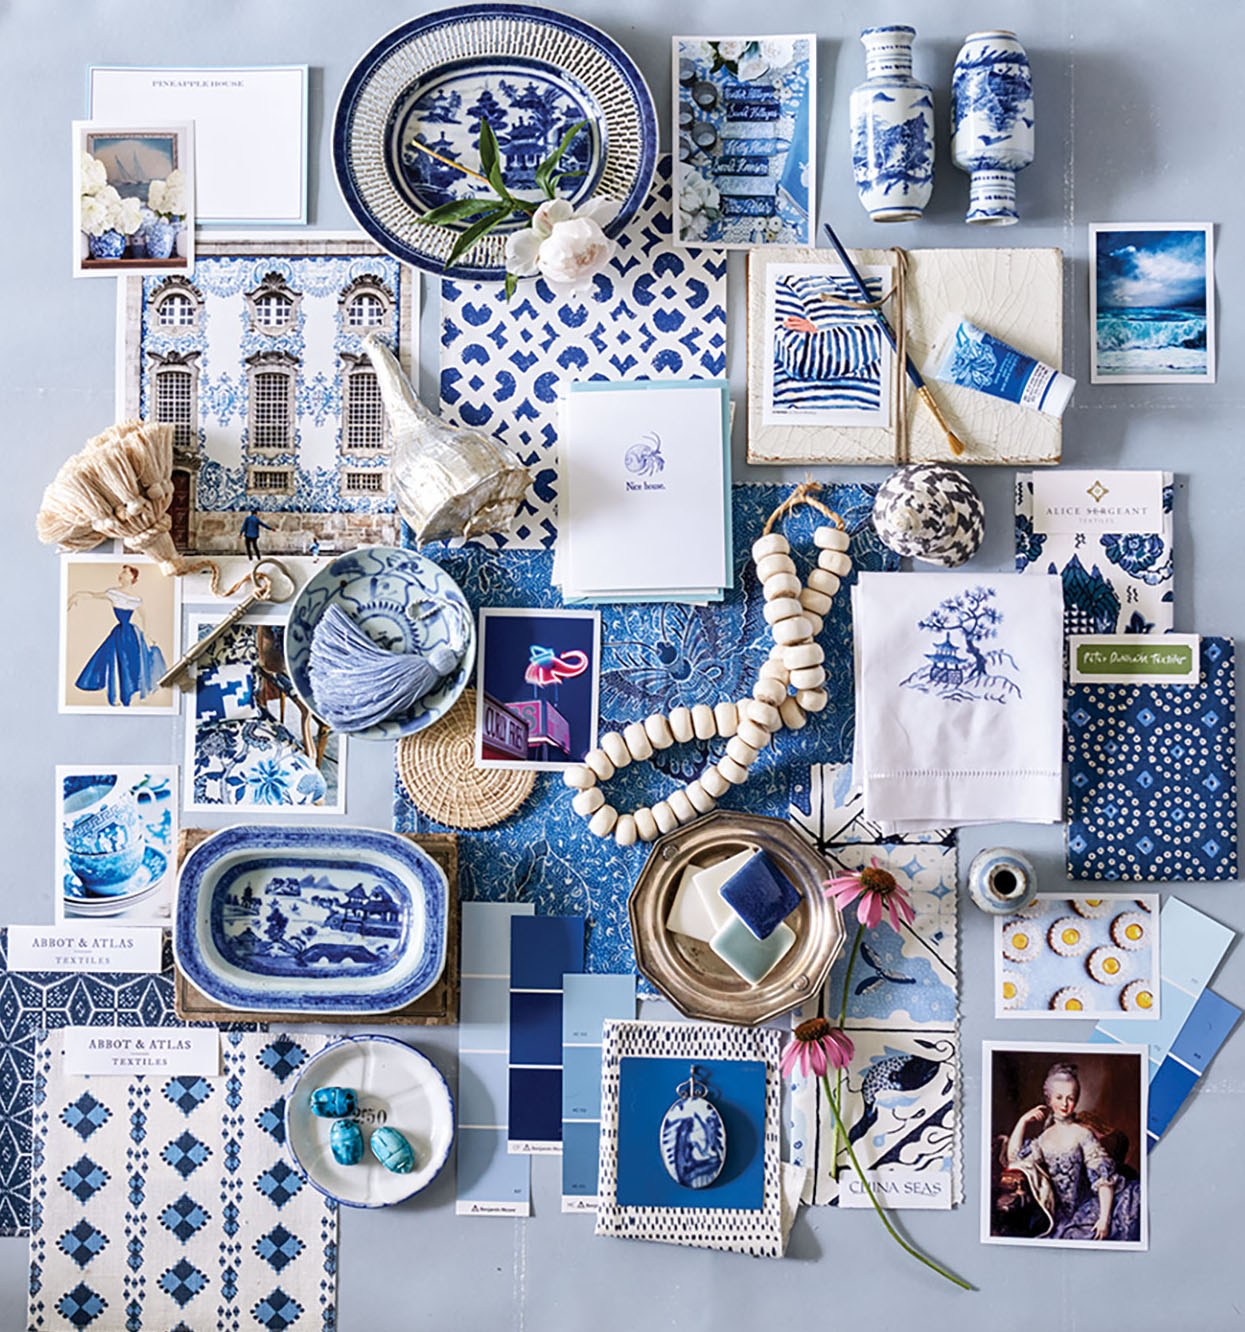 A Collage Of Blue And White, Including China Pieces, - Archduchess Marie Antoinette Habsburg-lotharingen , HD Wallpaper & Backgrounds